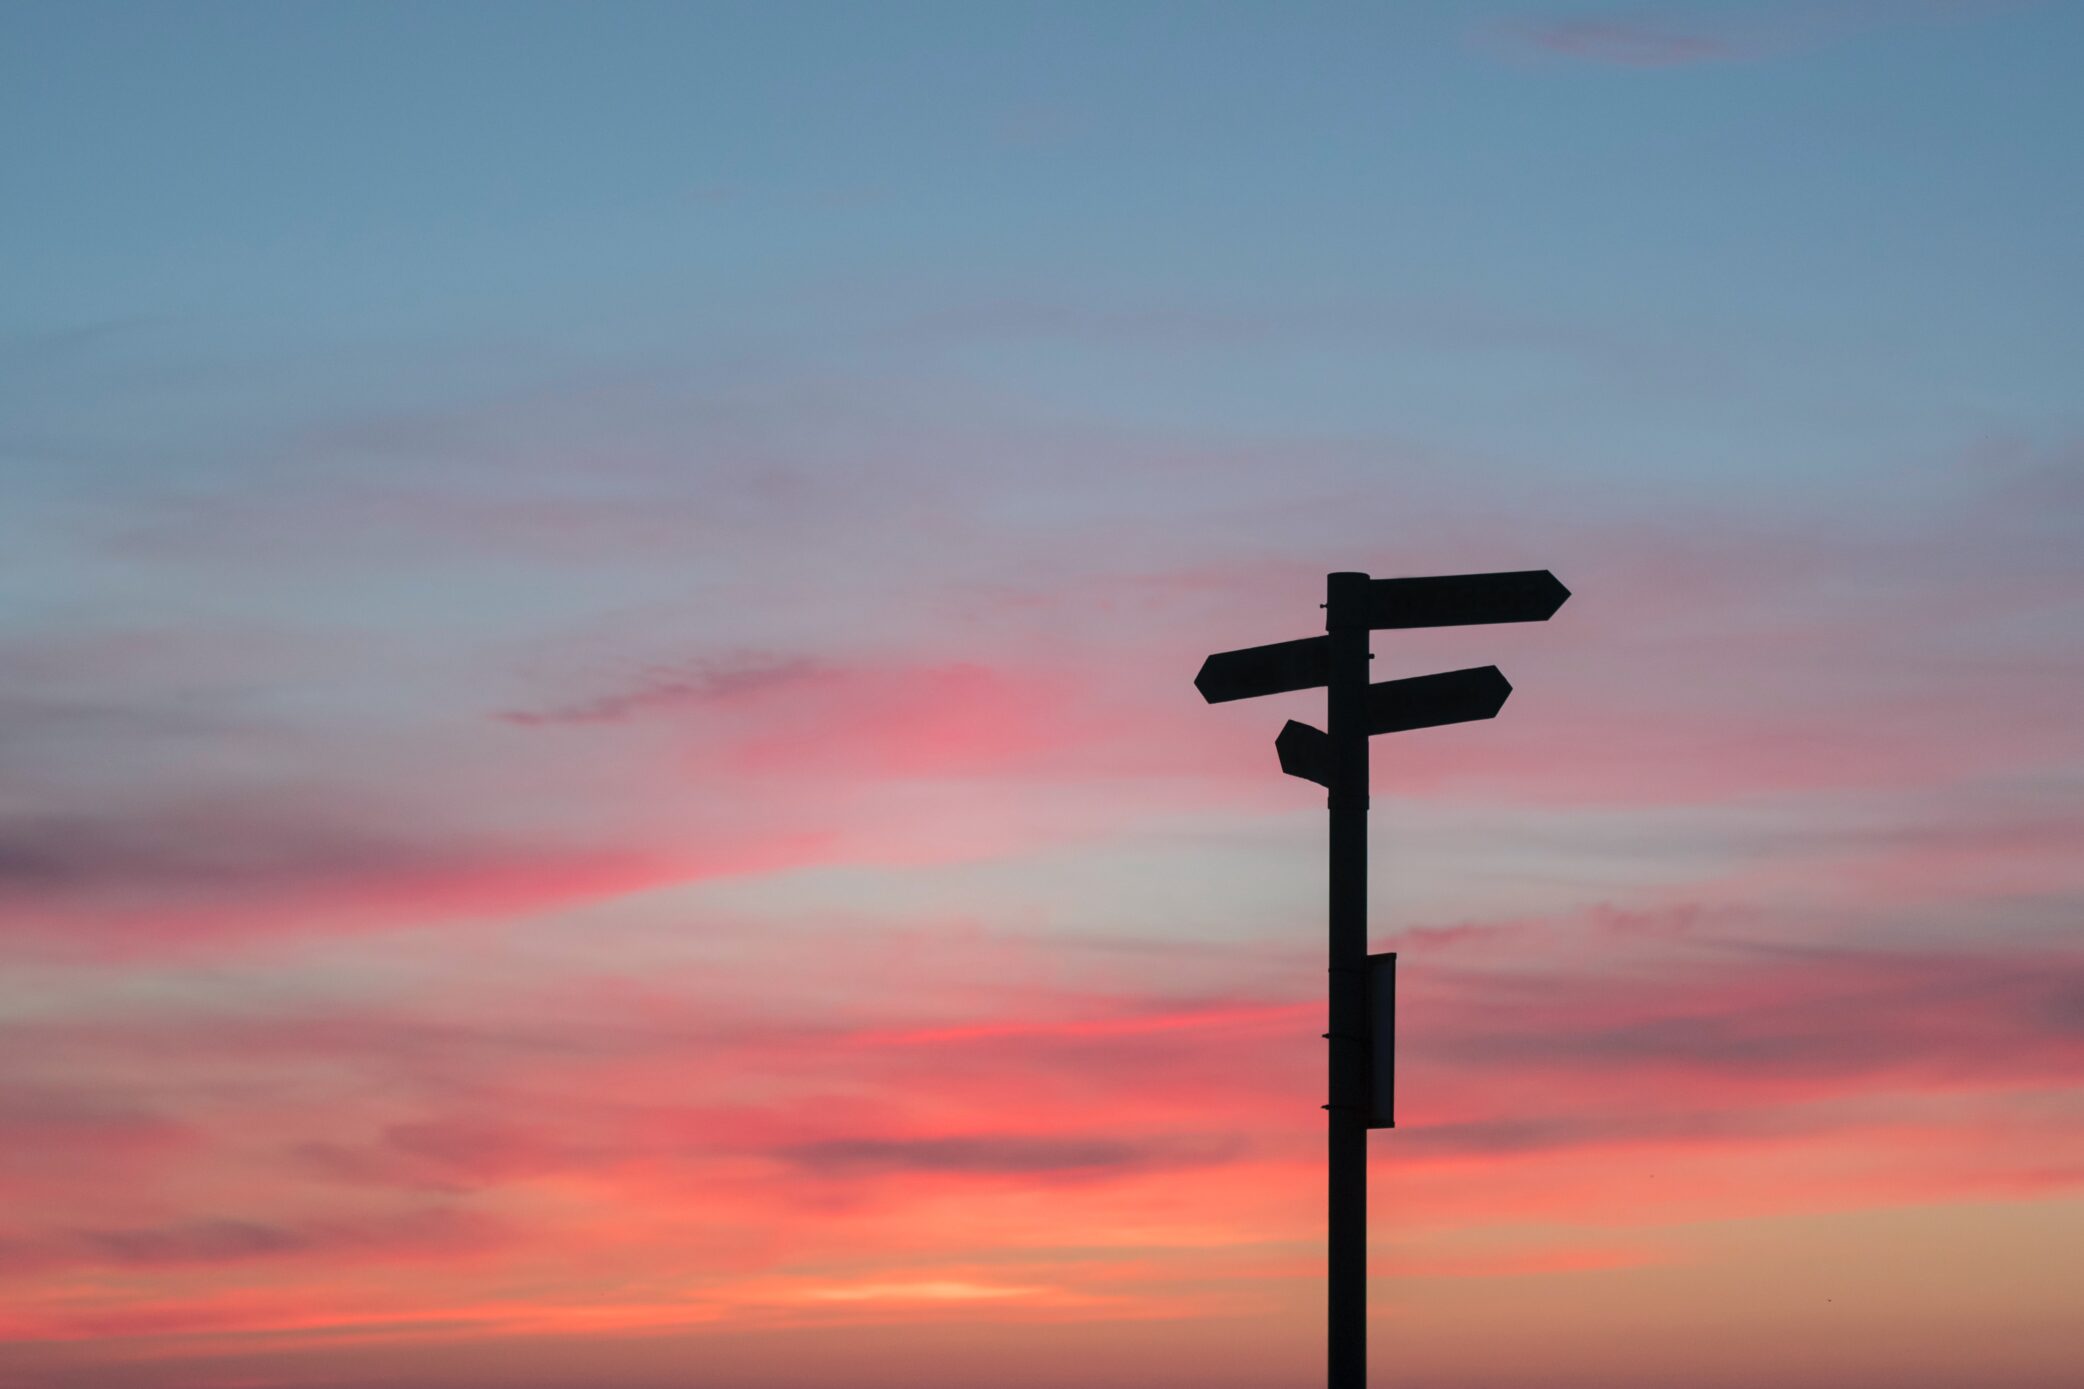 A sign post with a blue and pink sky.